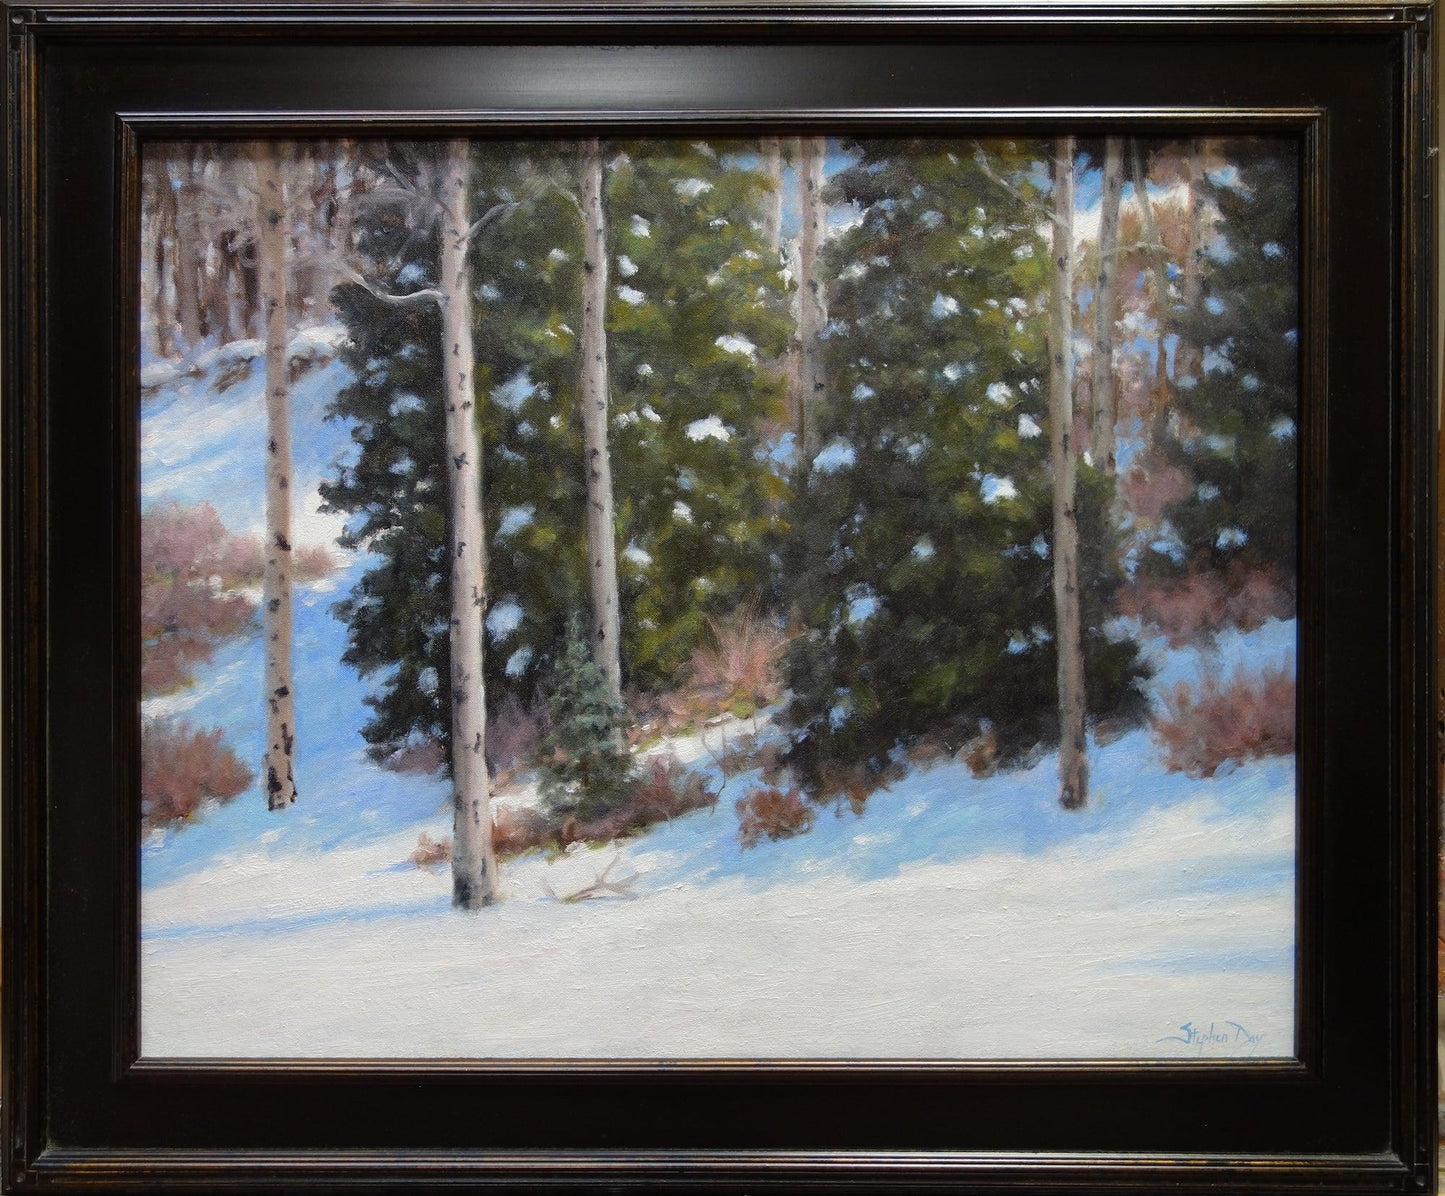 Late Winter-Painting-Stephen Day-Sorrel Sky Gallery